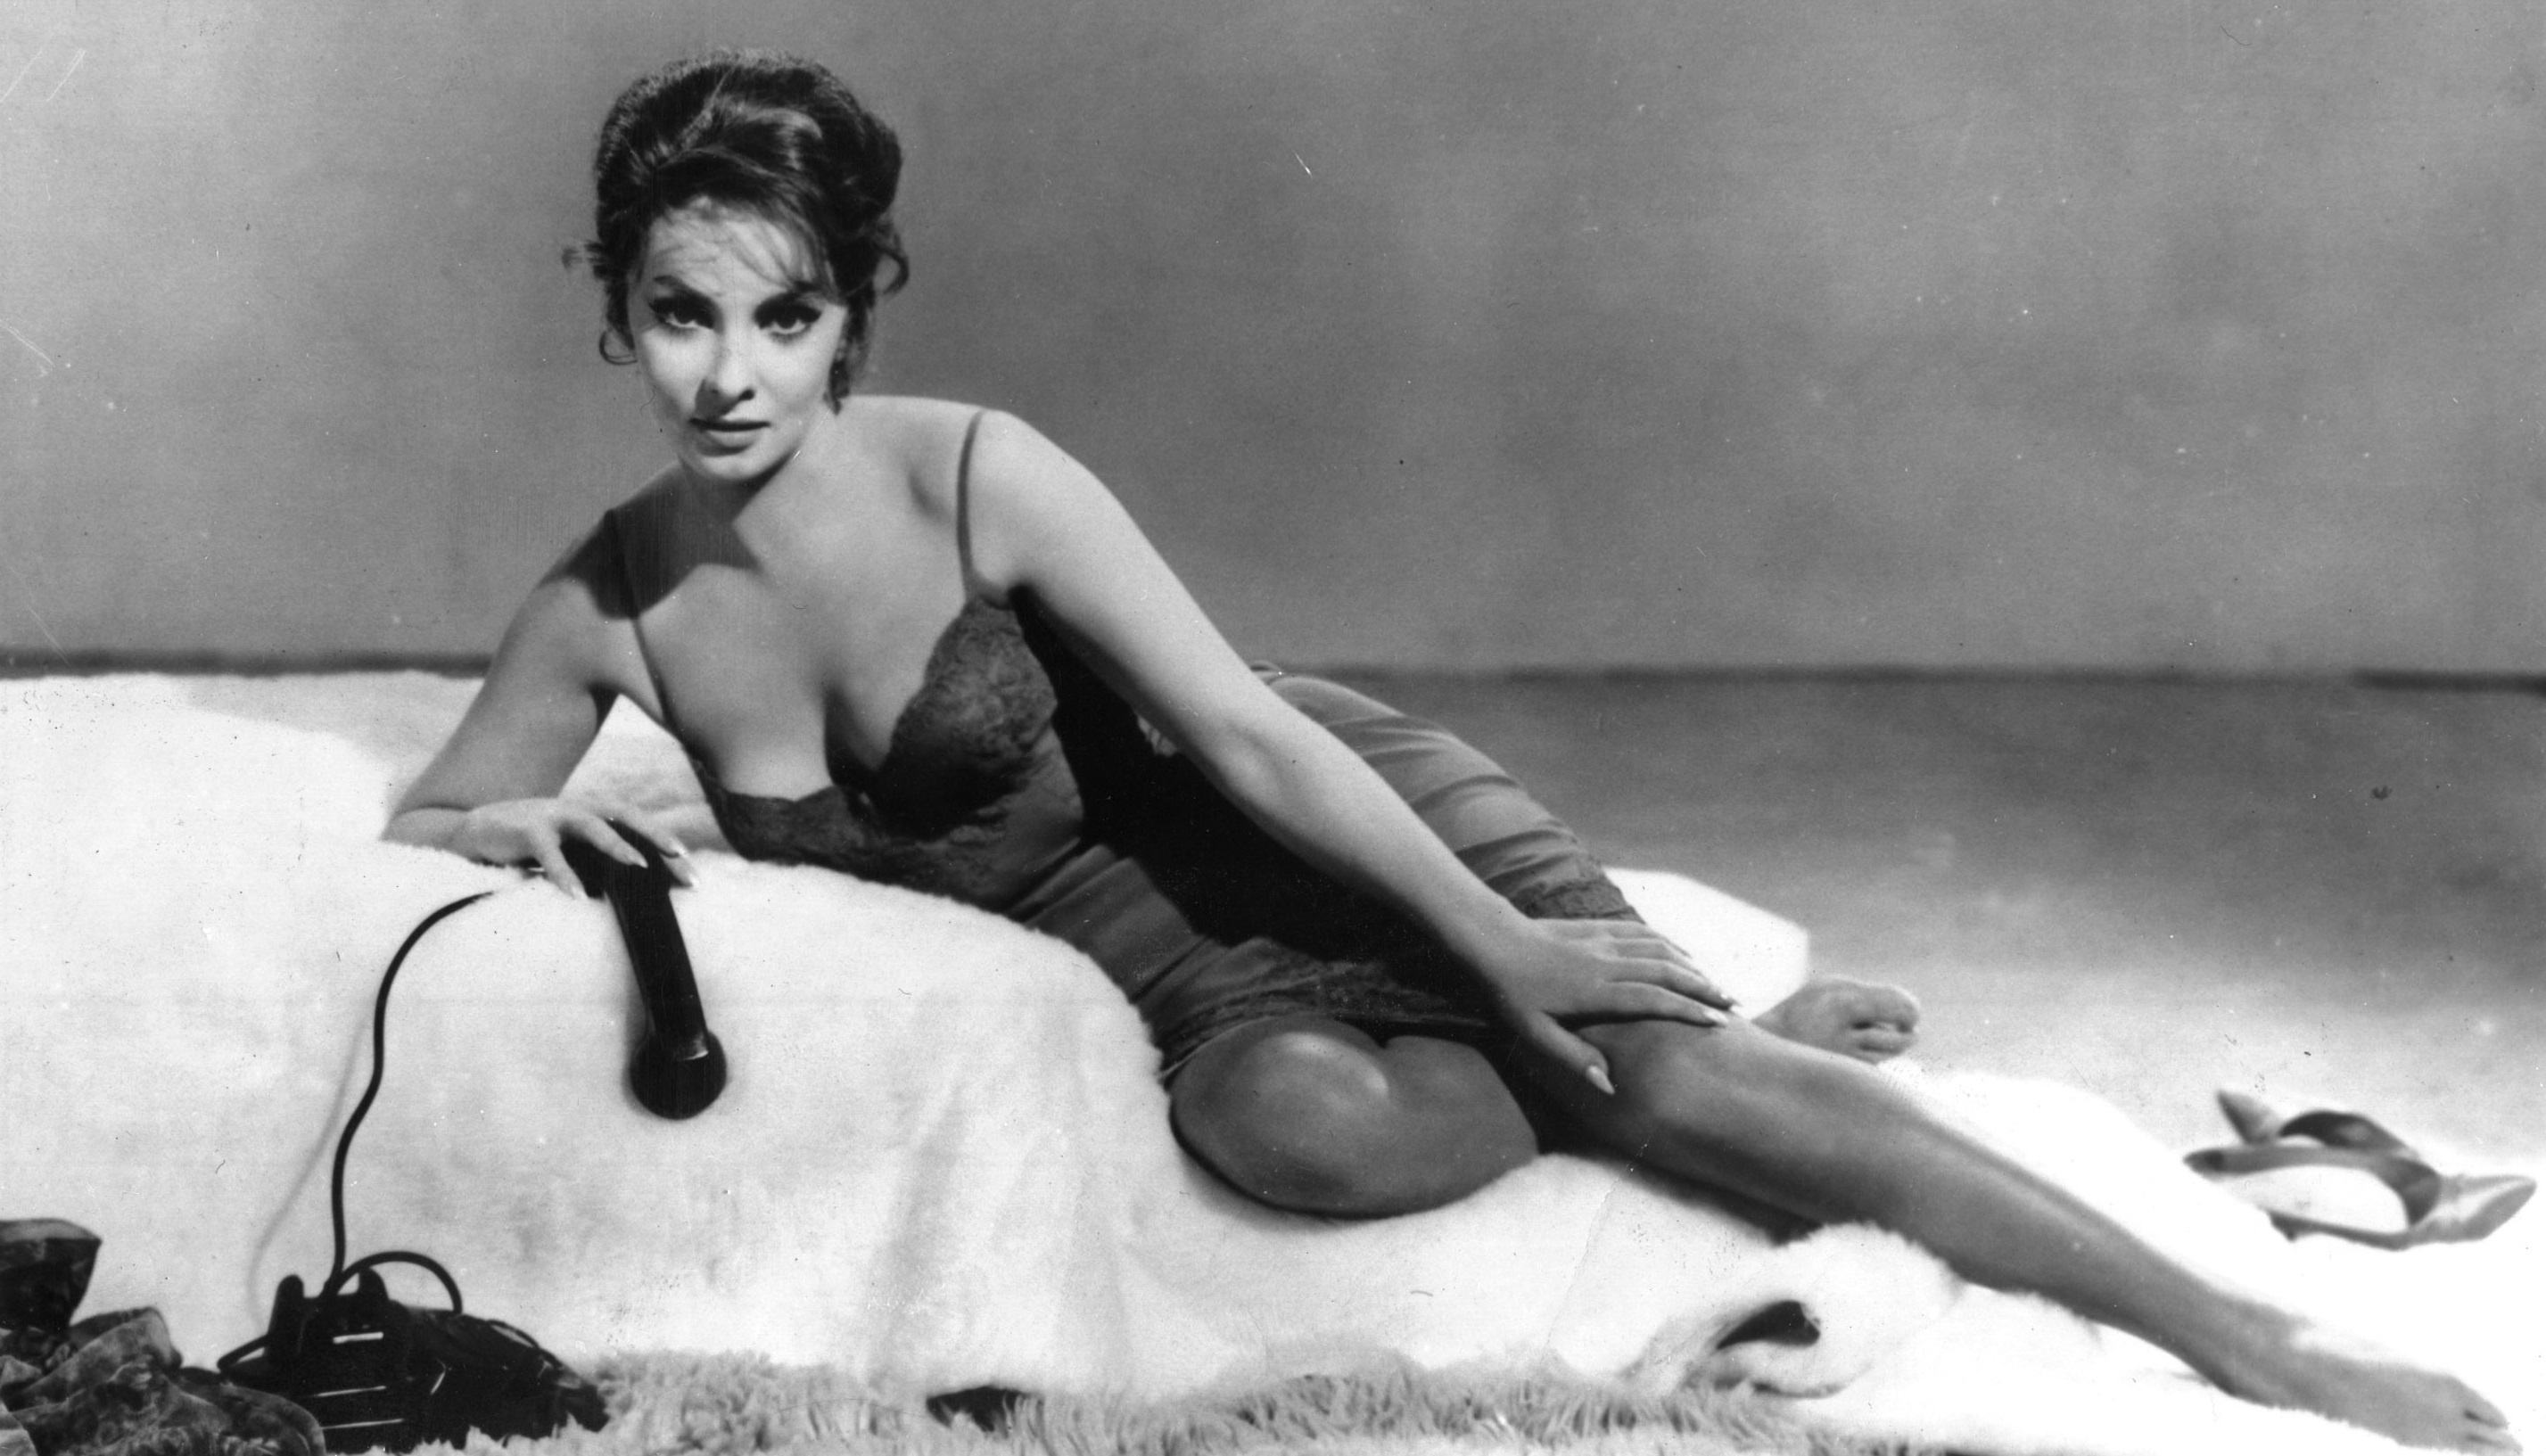 2855px x 1633px - Wallpaper gina lollobrigida, brunette, busty, italian, actress, celebrity,  hollywood, glamour, sexy babe, sexsymbol, vintage, posing, laying,  lingerie, retro, erotic, black and white, b&w, real celebs wall, sex symbol  desktop wallpaper - Celebrities -